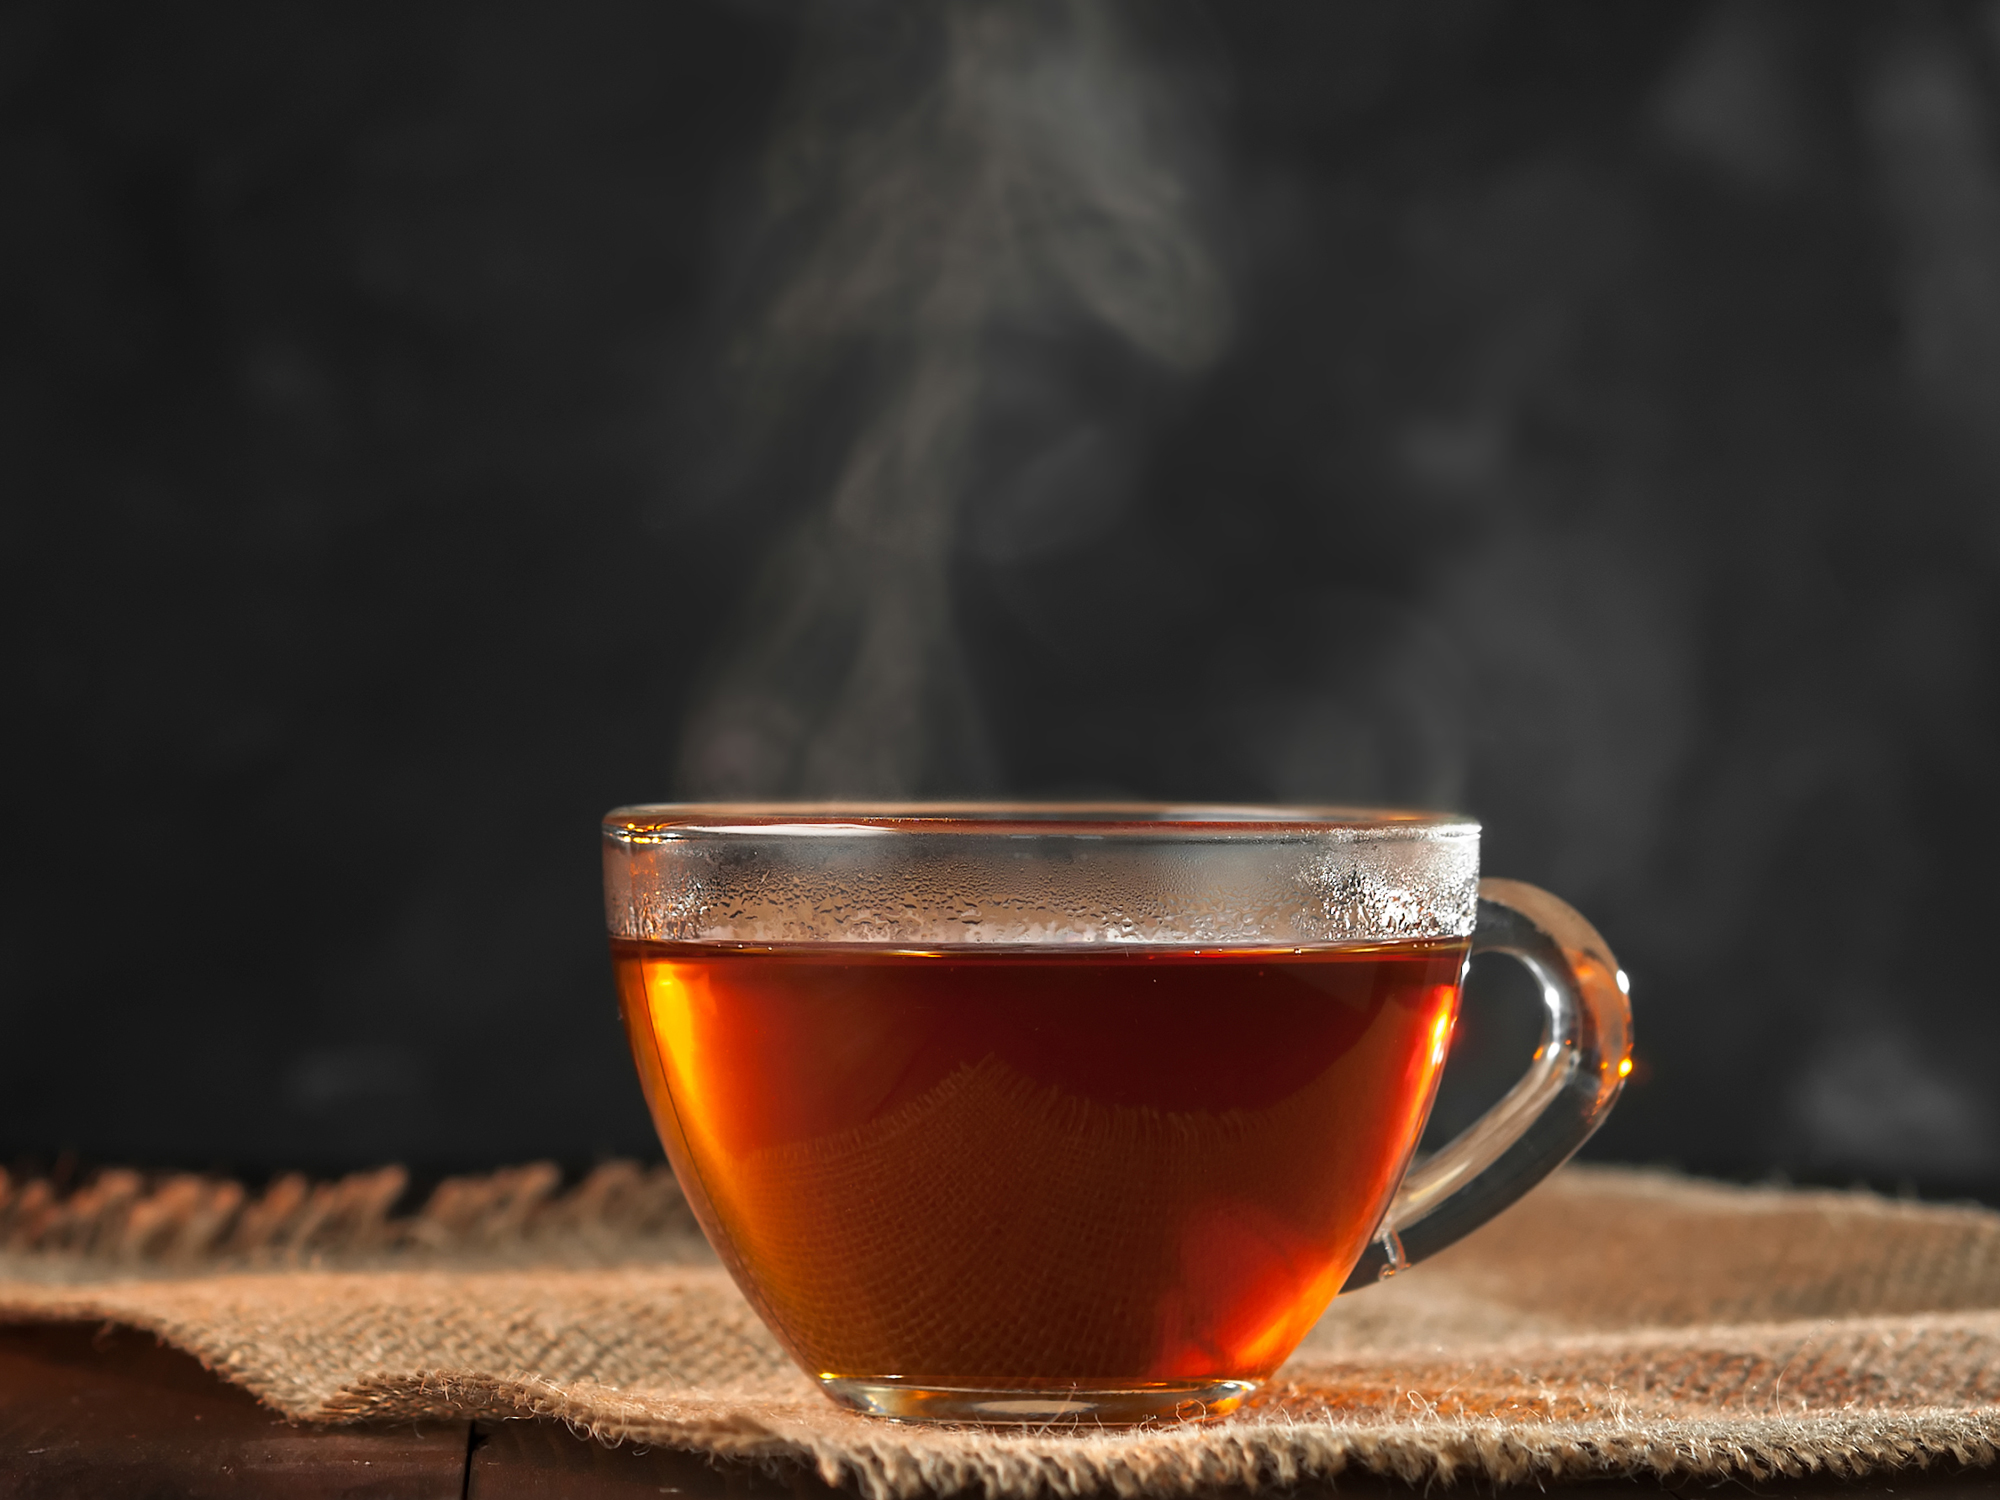 The burning truth about hot tea (and maybe coffee) and esophageal cancer